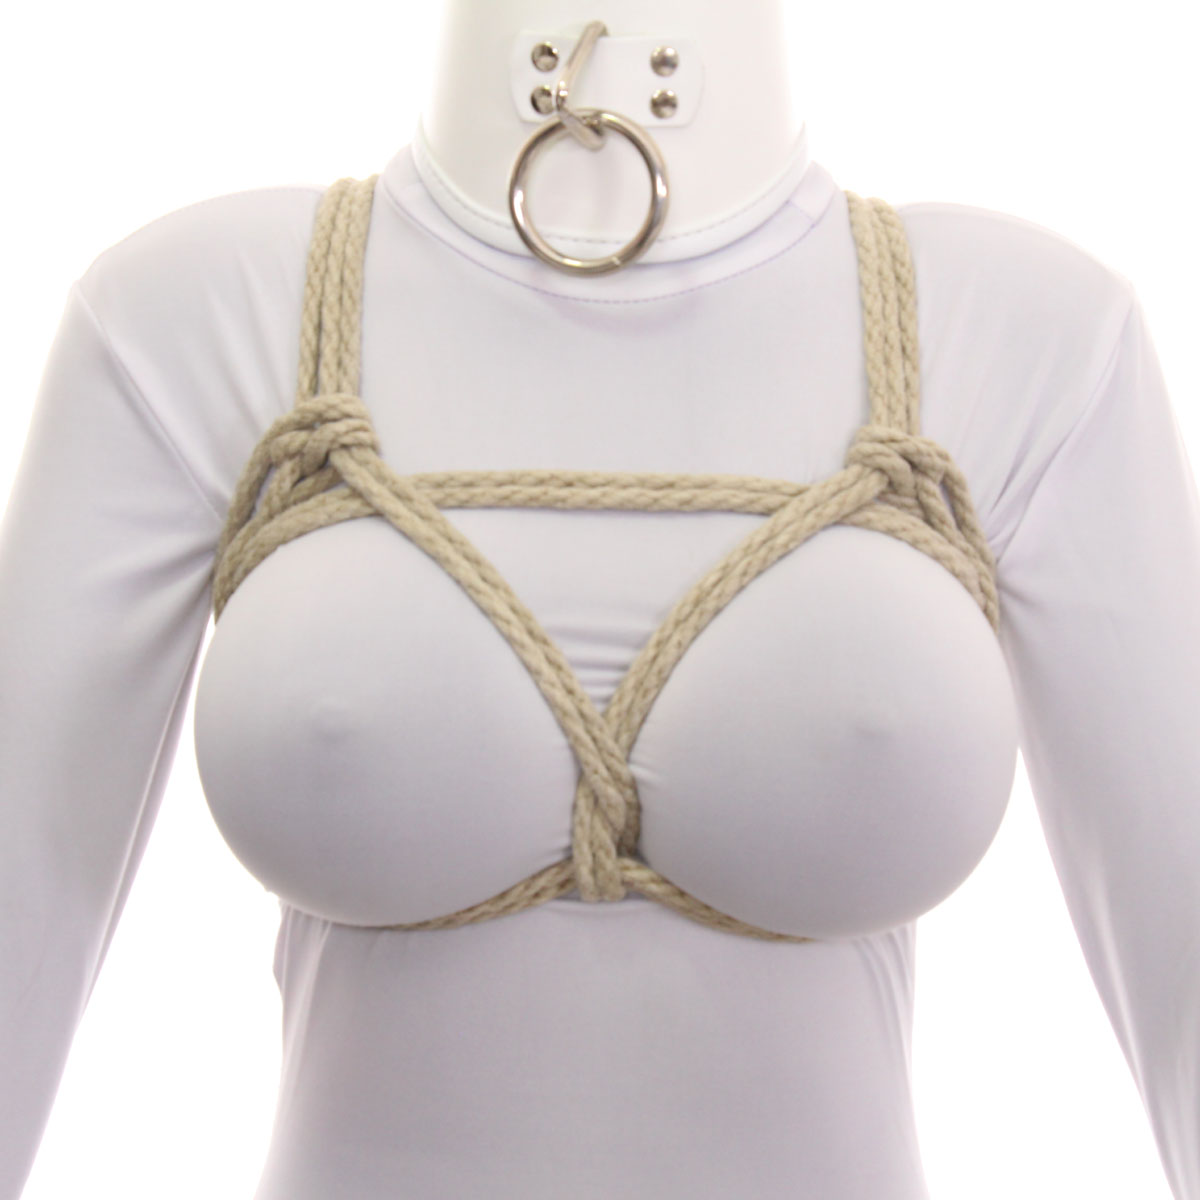 Rope Breast Harness